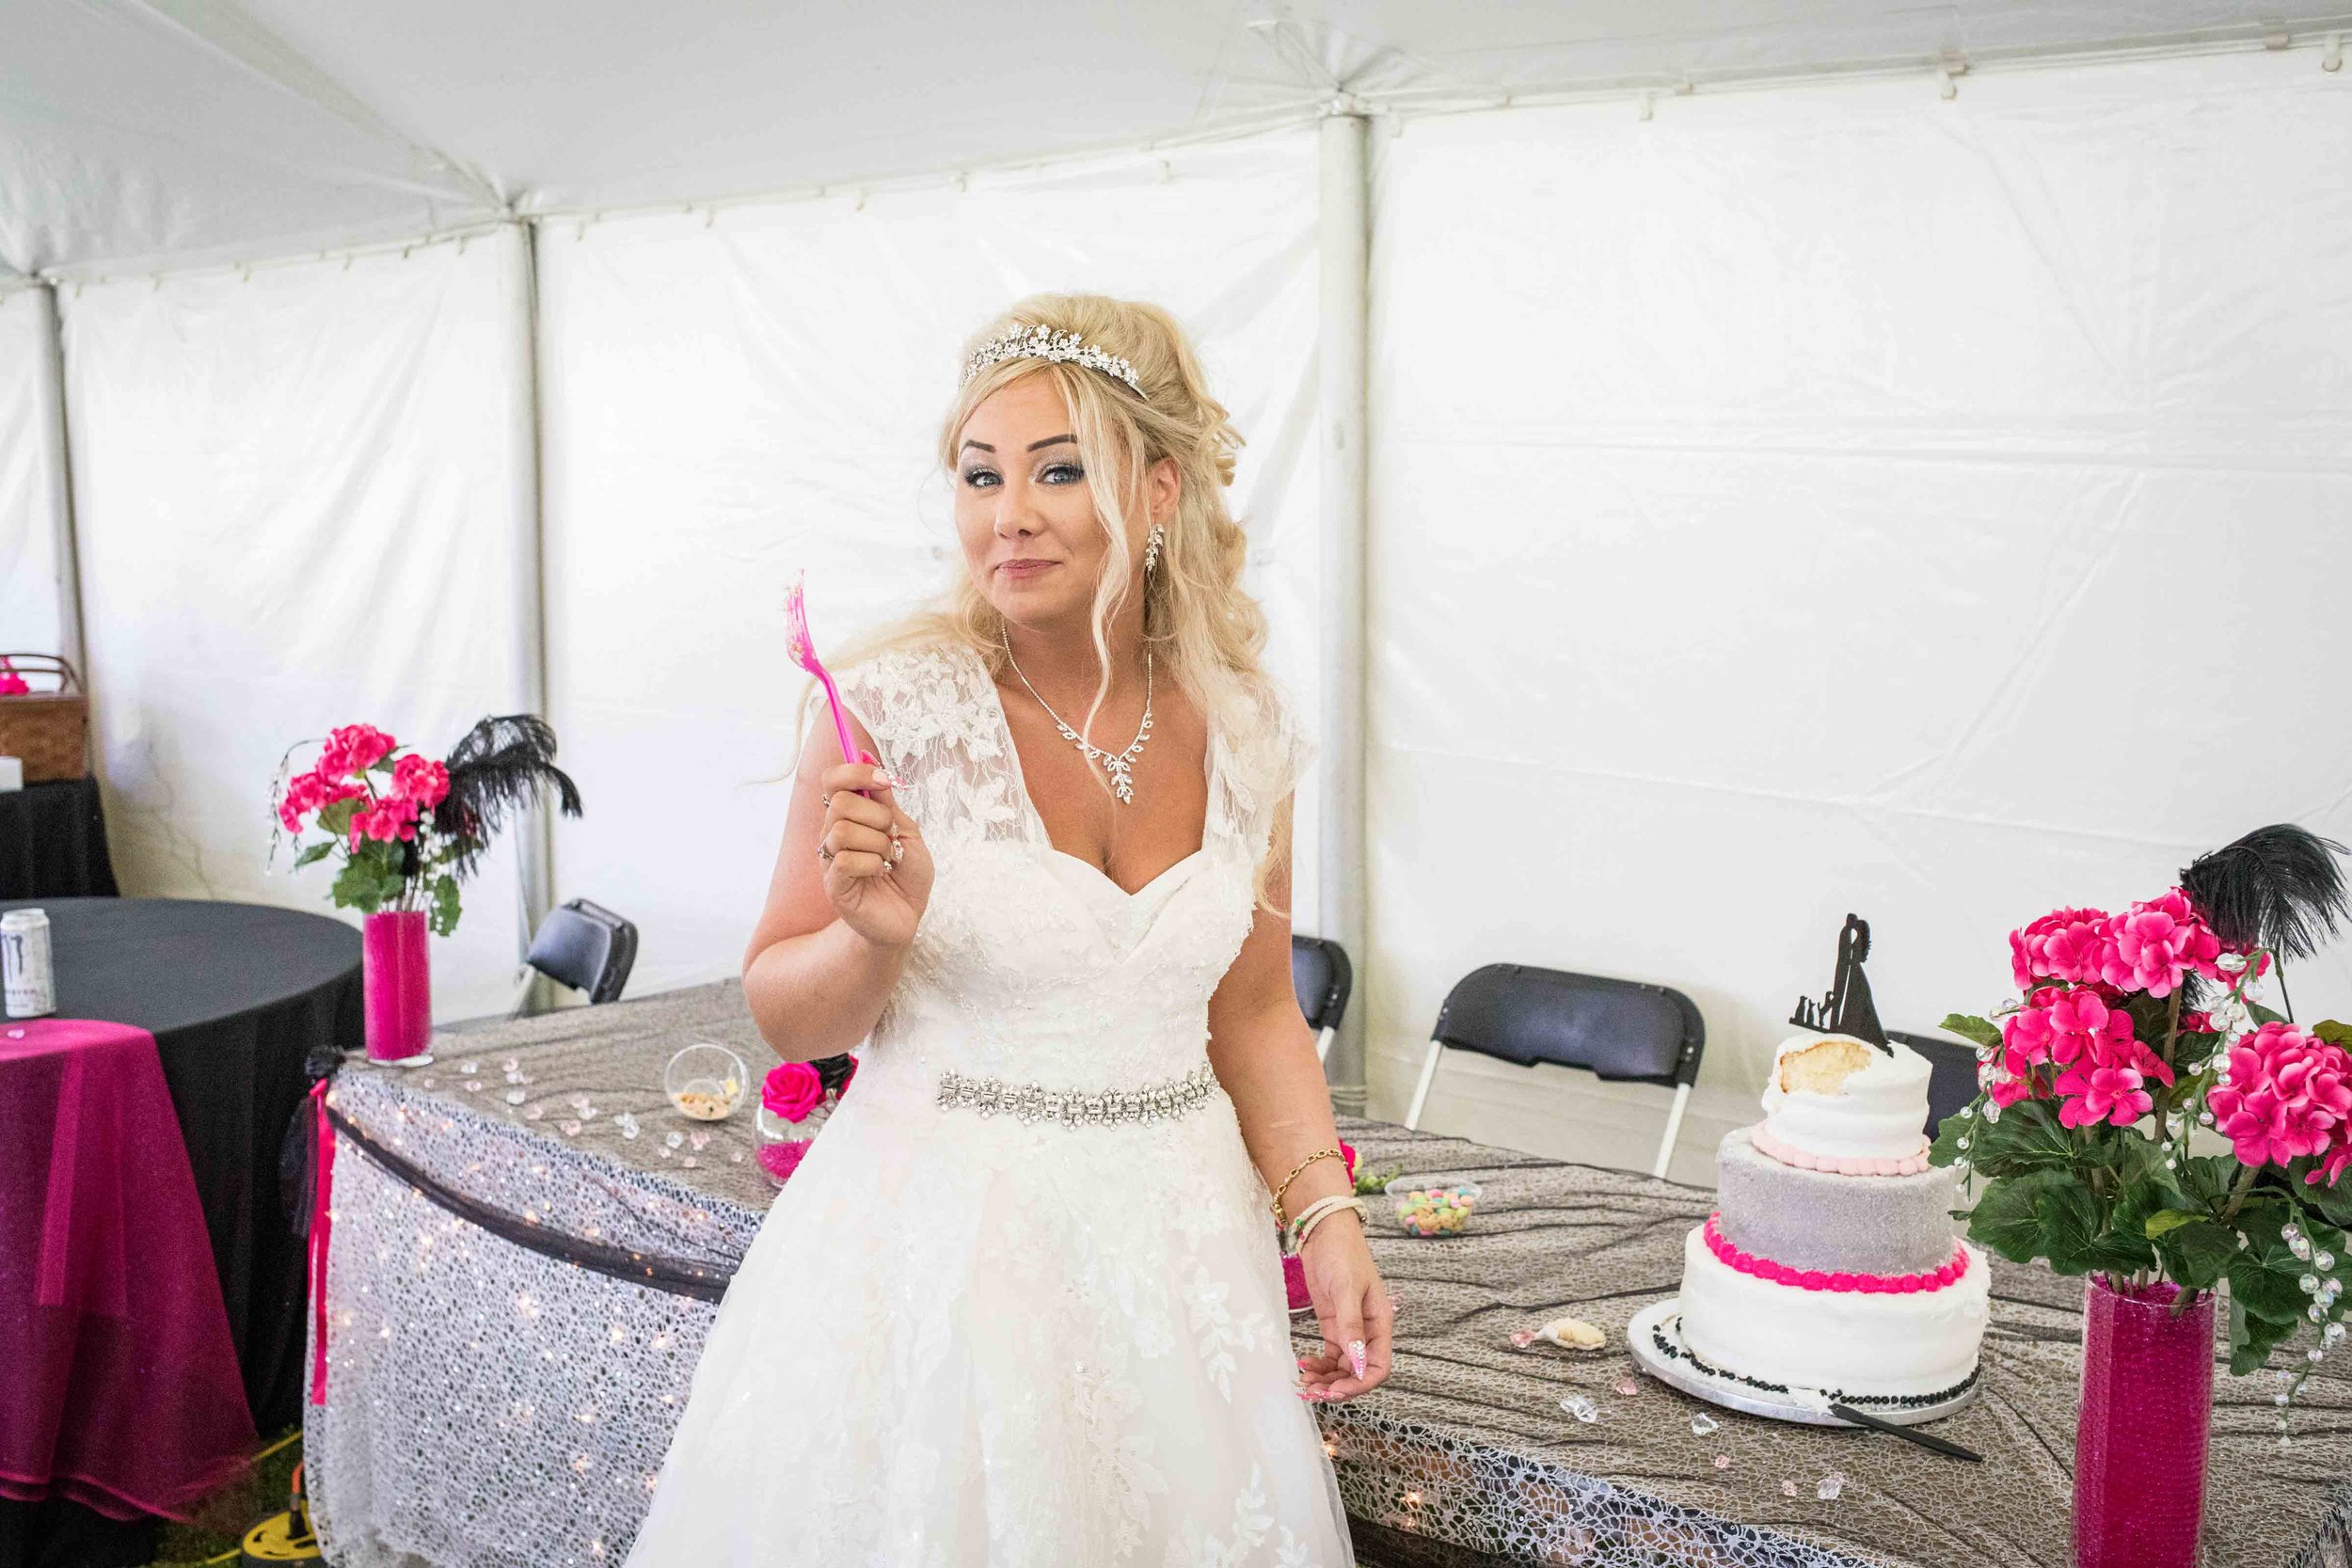  The bride taunts the camera with her pink fork and cake 